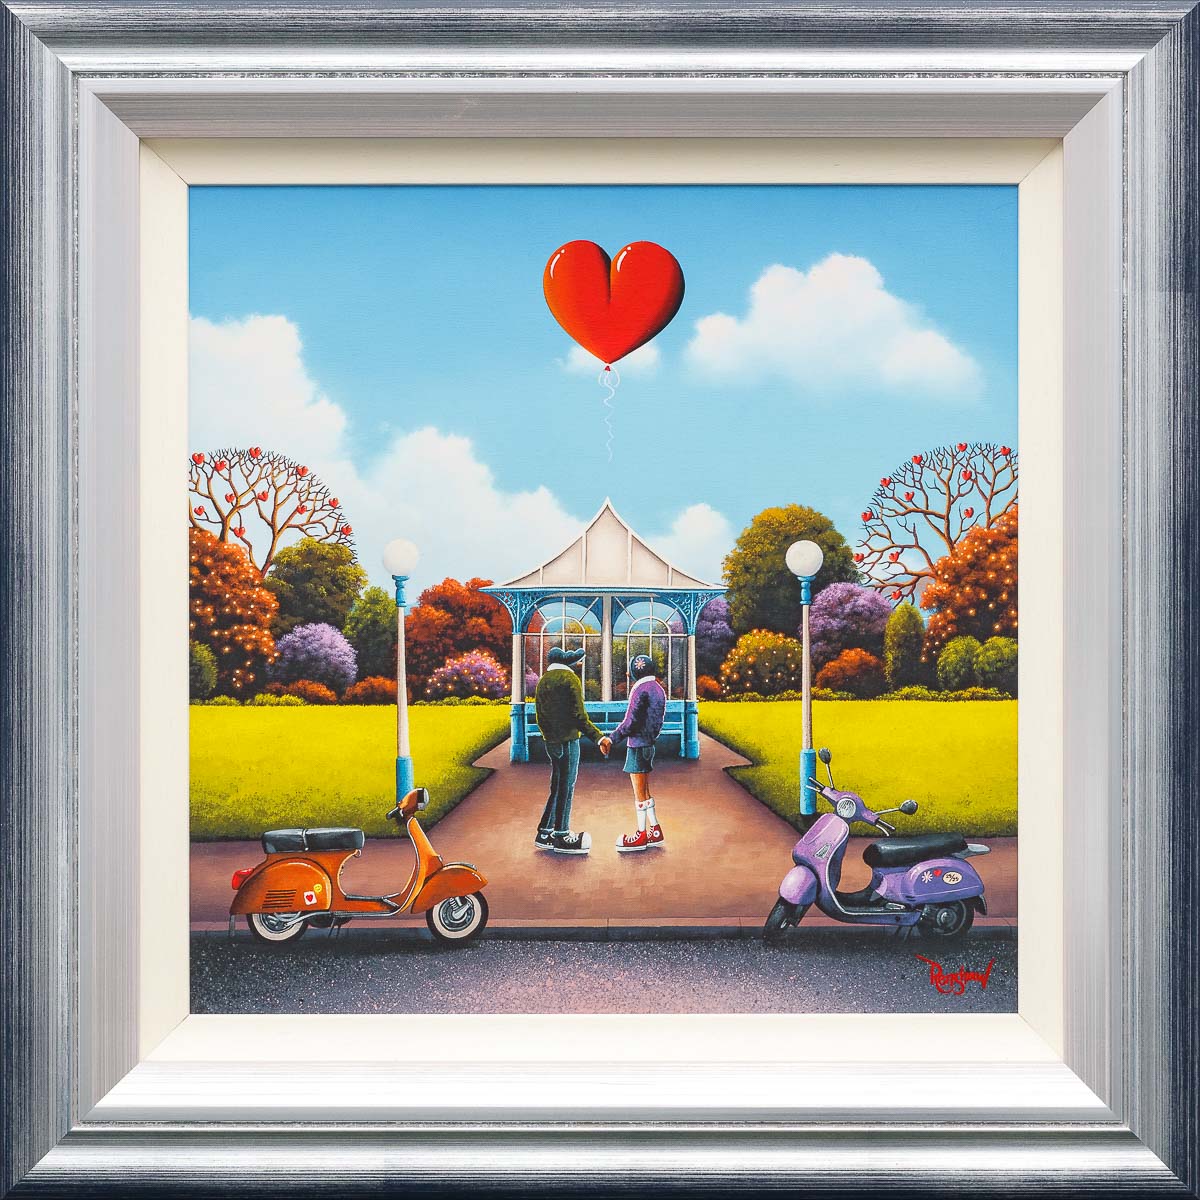 Our First Date - Boutique Edition David Renshaw Boutique Edition